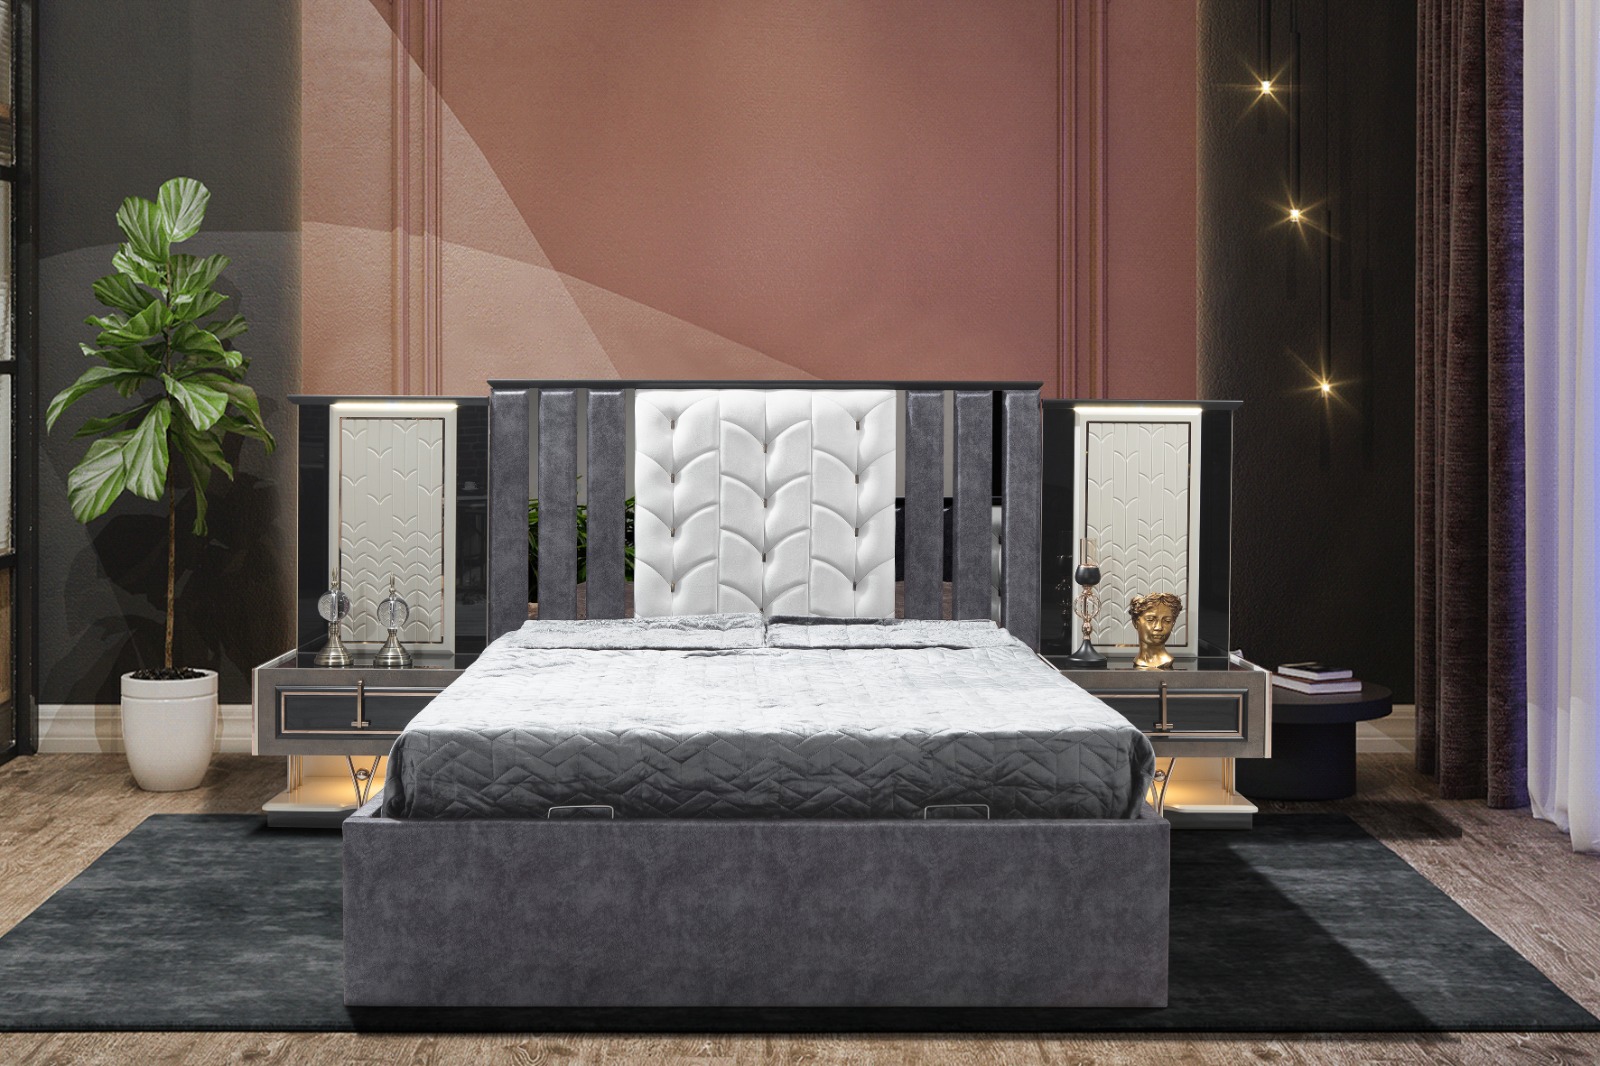 Bedroom 1.3 mil This set consists of a bed, two nightstands, a dresser, an oval mirror, and a stool. The bed features soft PU upholstery with channeled detailing, adding both elegance and snugness to your space.